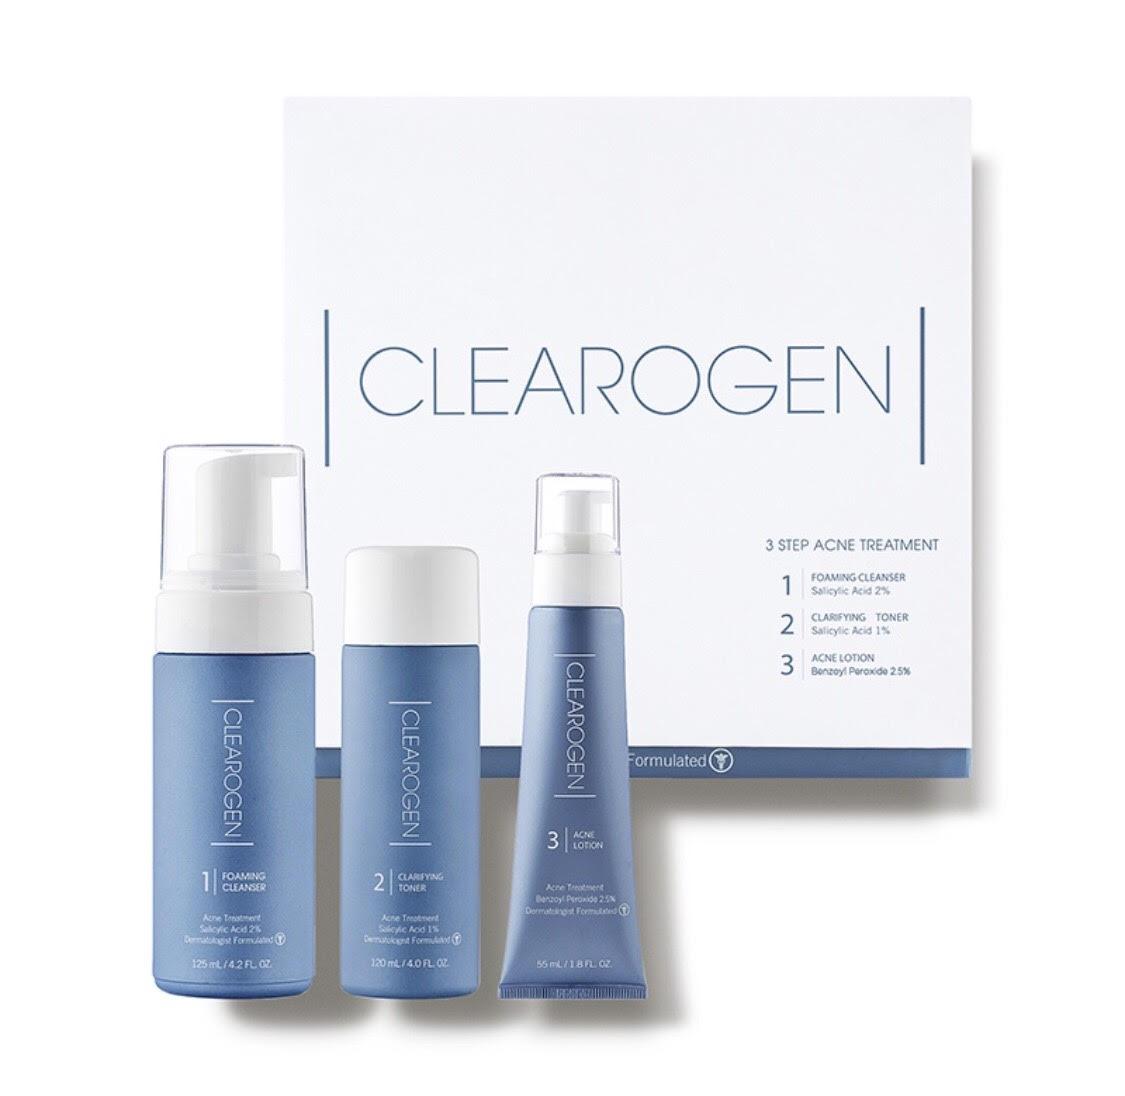 CLEAROGEN 3-Step Acne Treatment": Achieve clear skin with prescription-grade ingredients and natural botanicals.